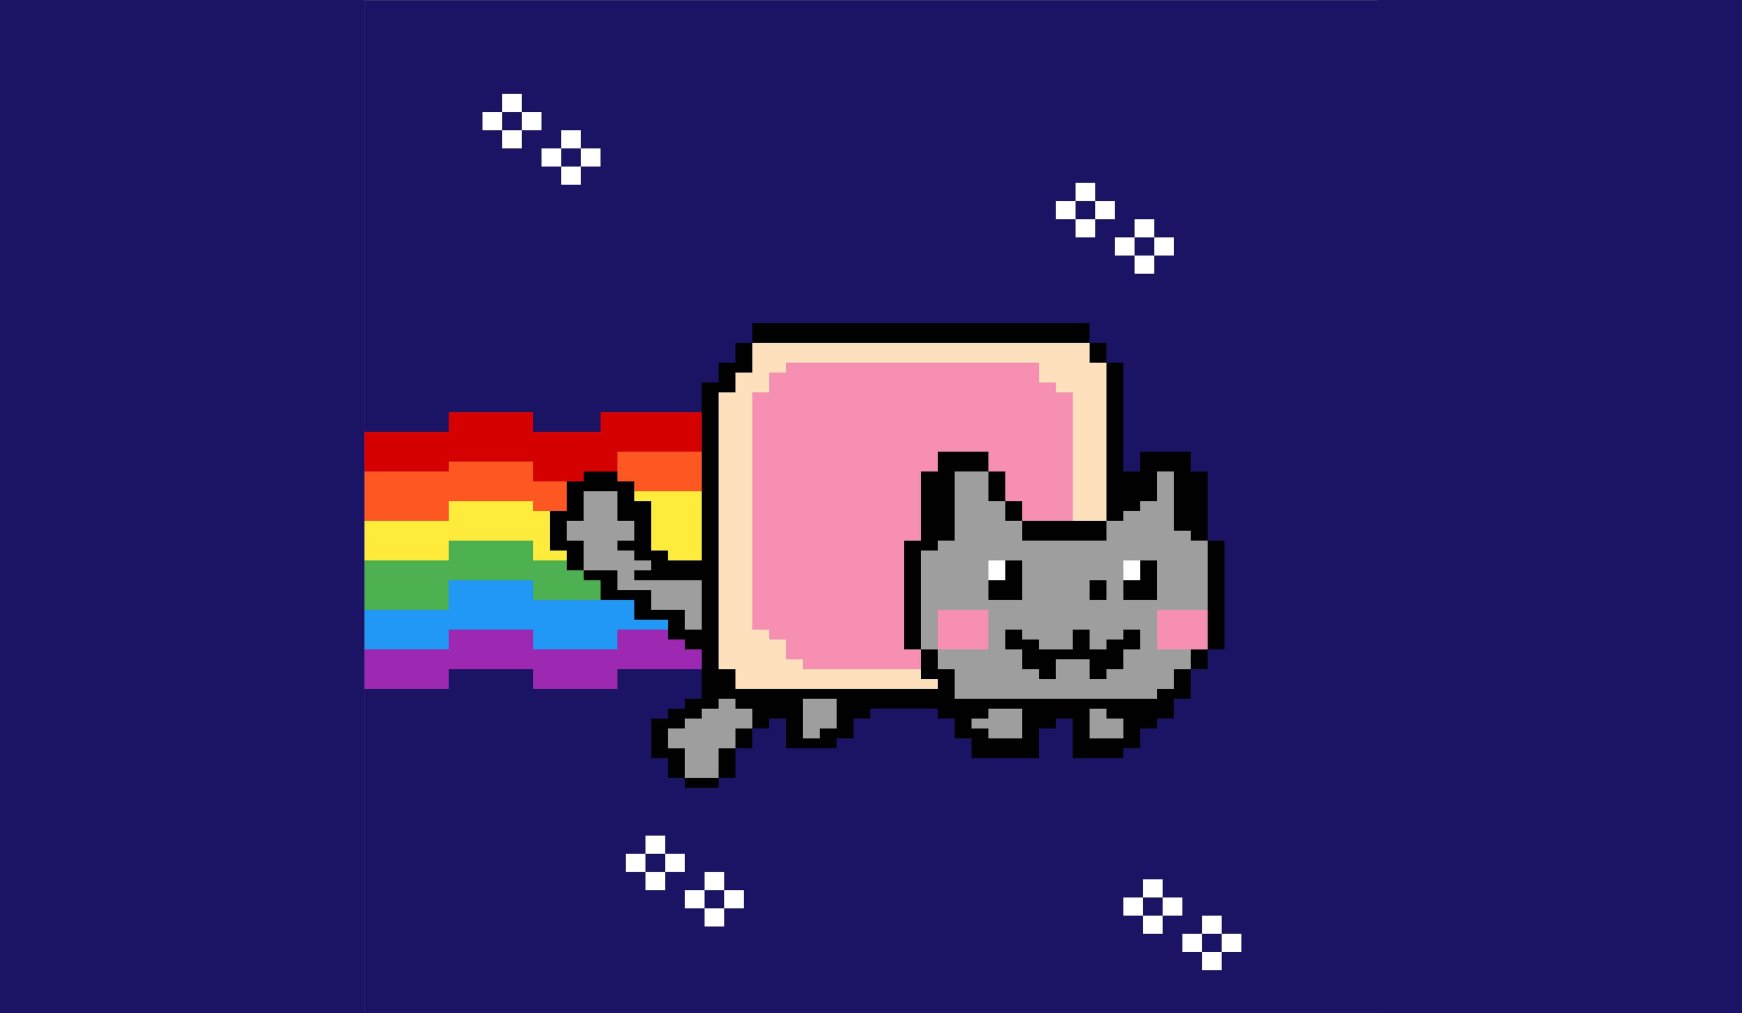 Nyan Cat is a YouTube video uploaded in April 2011, which became an internet meme (Screengrab/ Twitter)